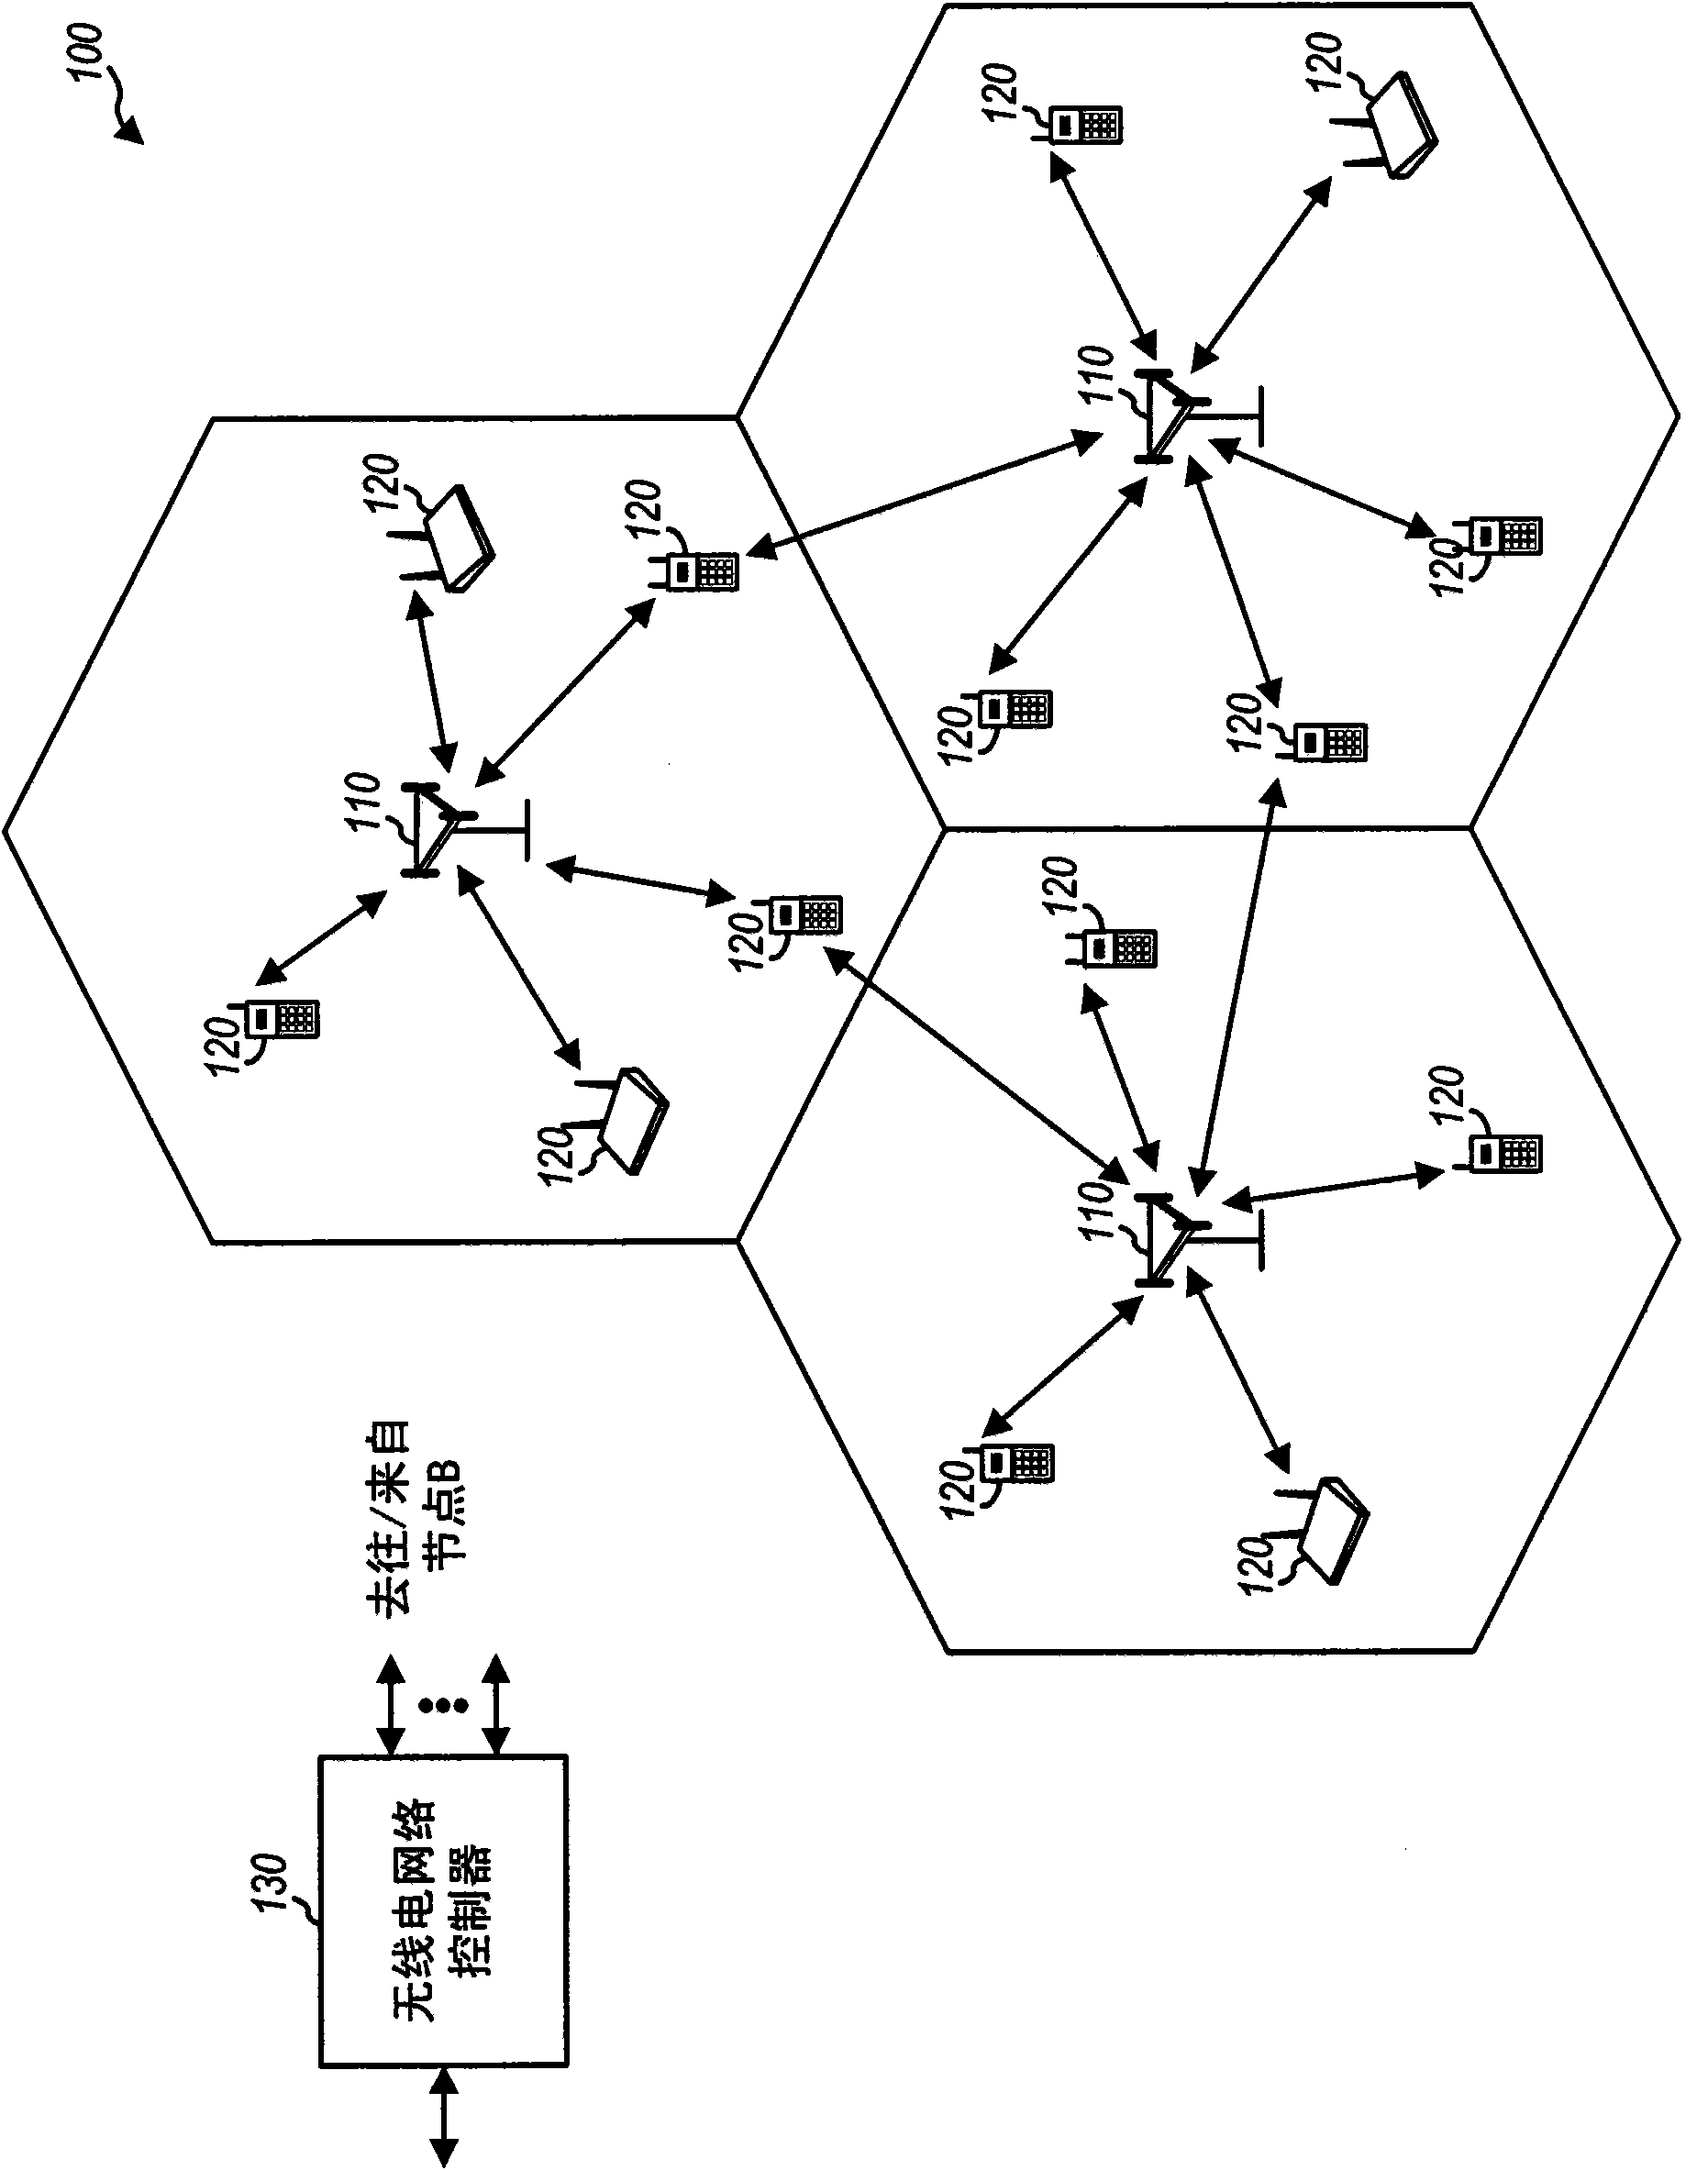 Method and apparatus for link control in a wireless communication system